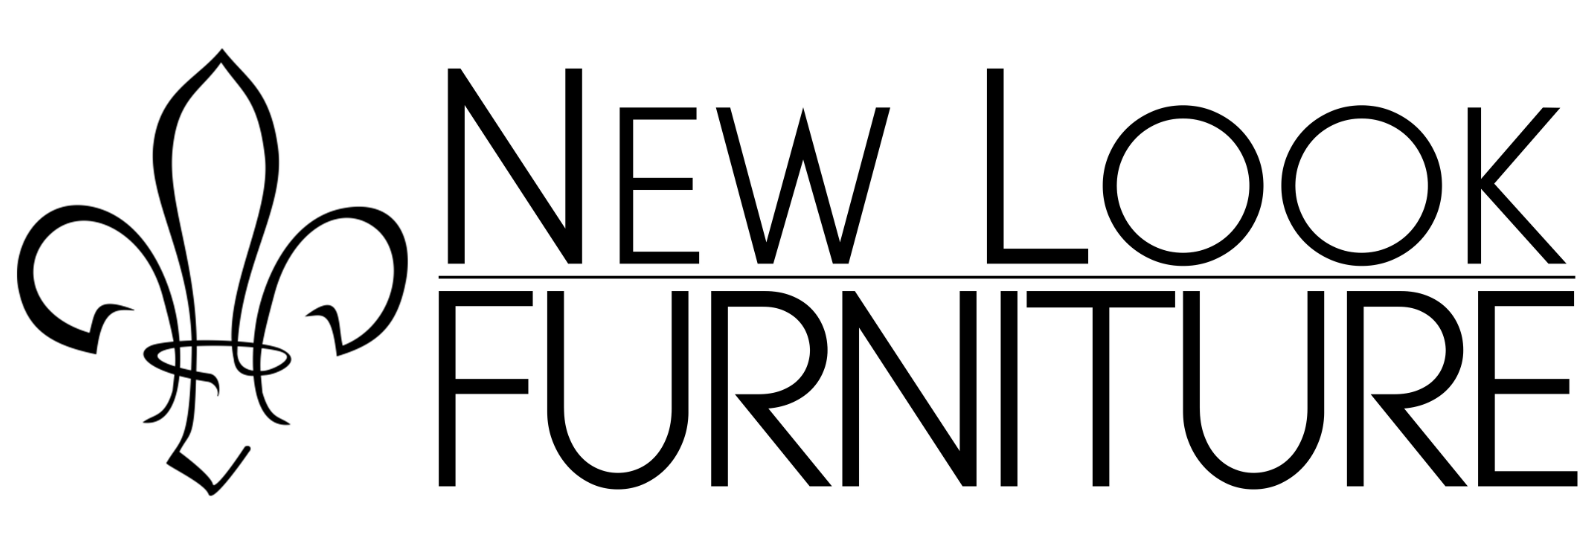 New Look Furniture